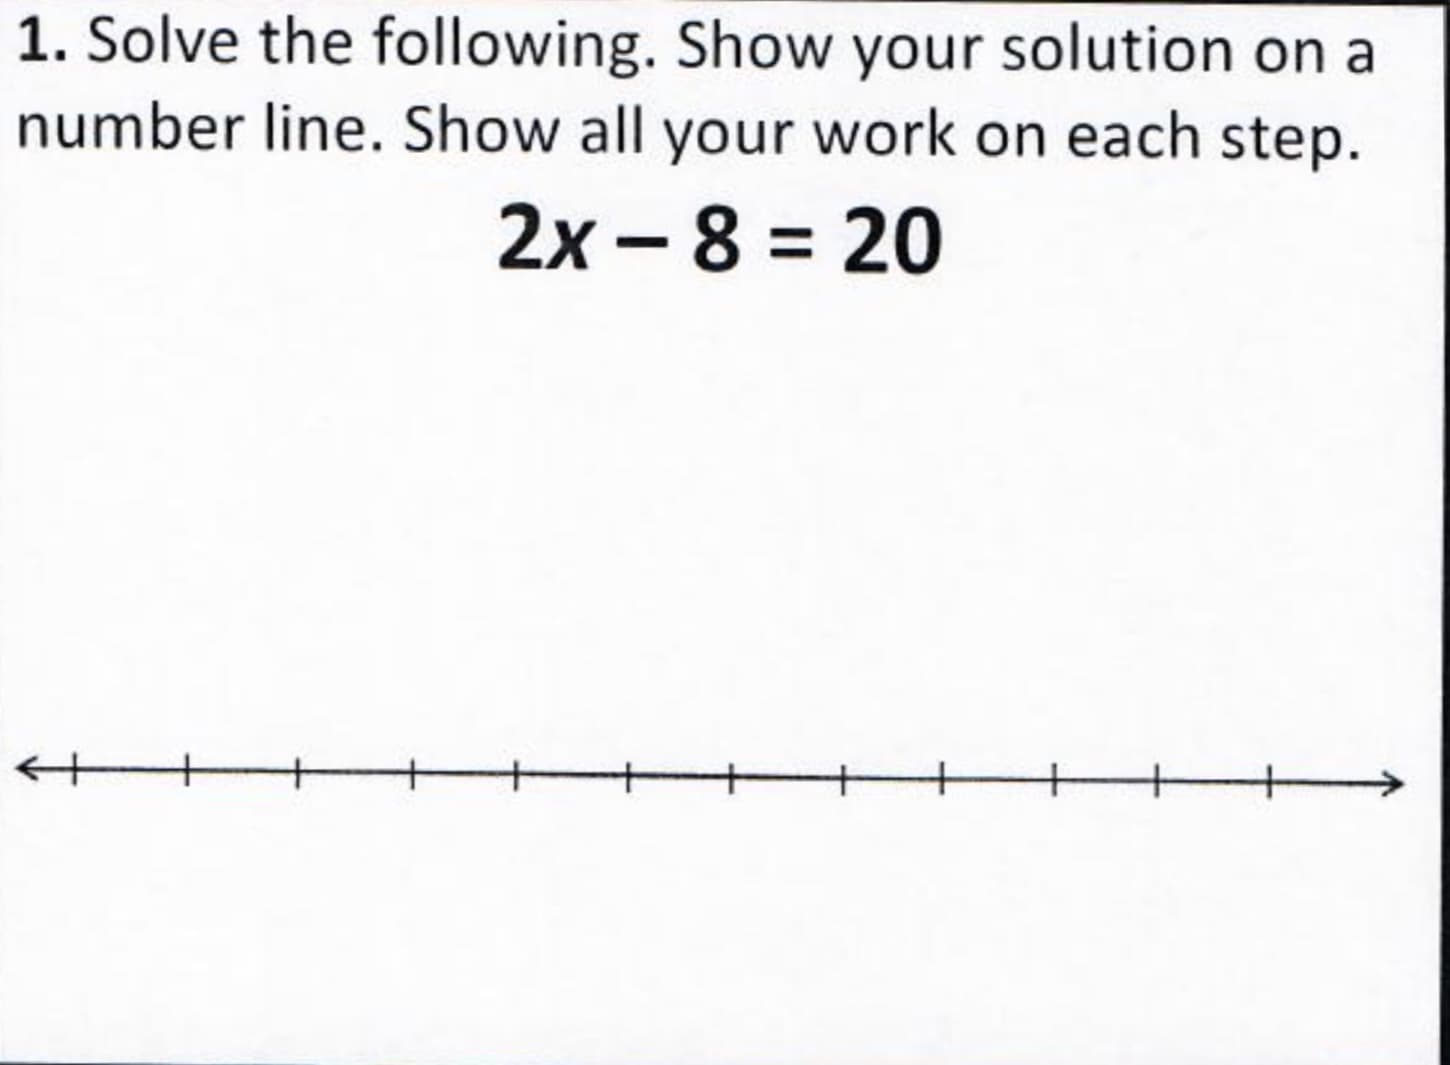 1. Solve the following. Show your solution on a
number line. Show all your work on each step.
2x -8 = 20
%3D
|
